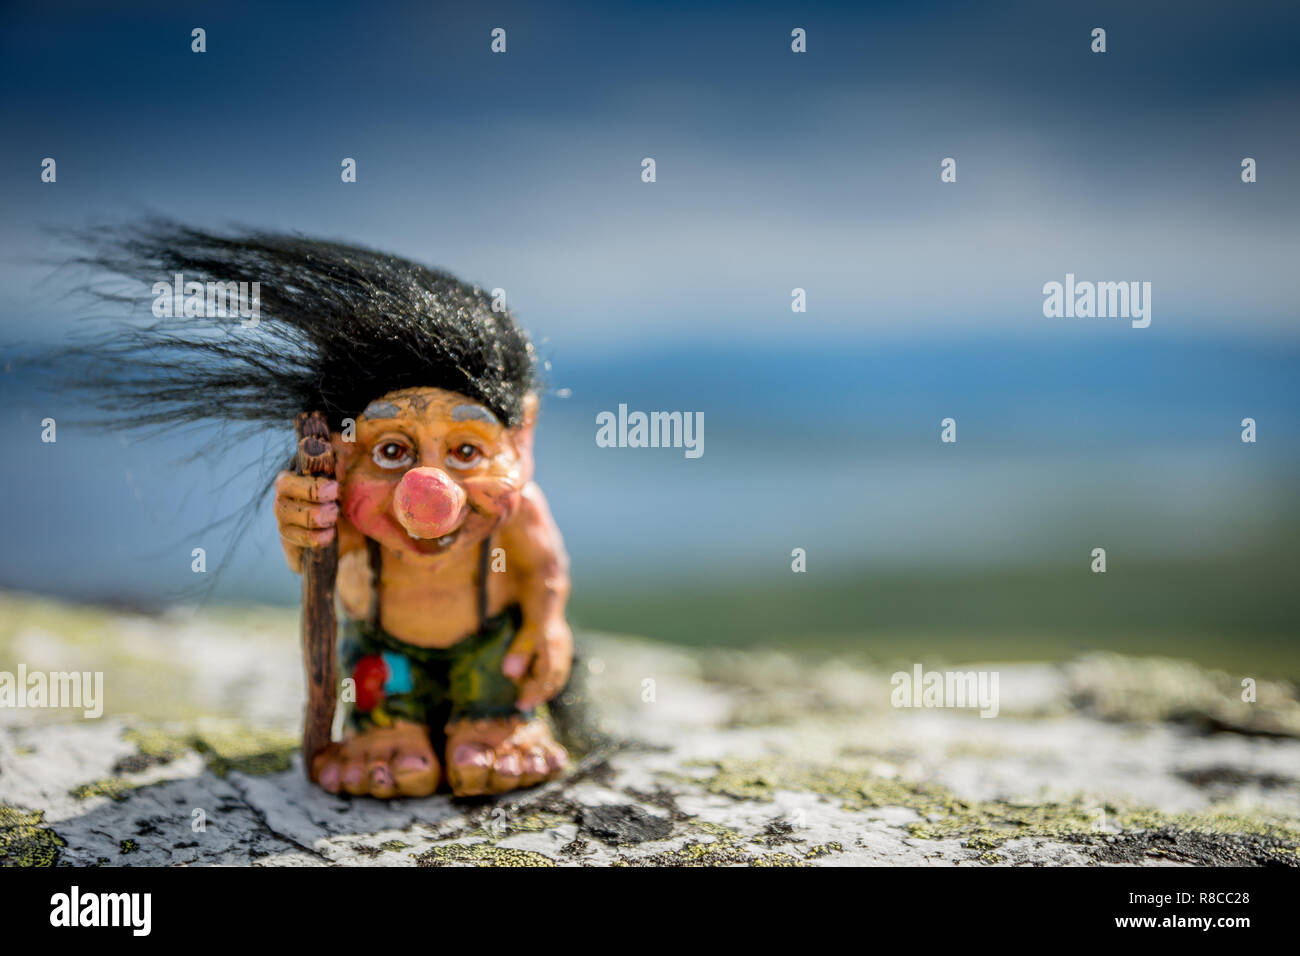 Happy troll out in the nature with his walking stick and black hair. Hair, hike, nature, wilderness, camping concept. Stock Photo